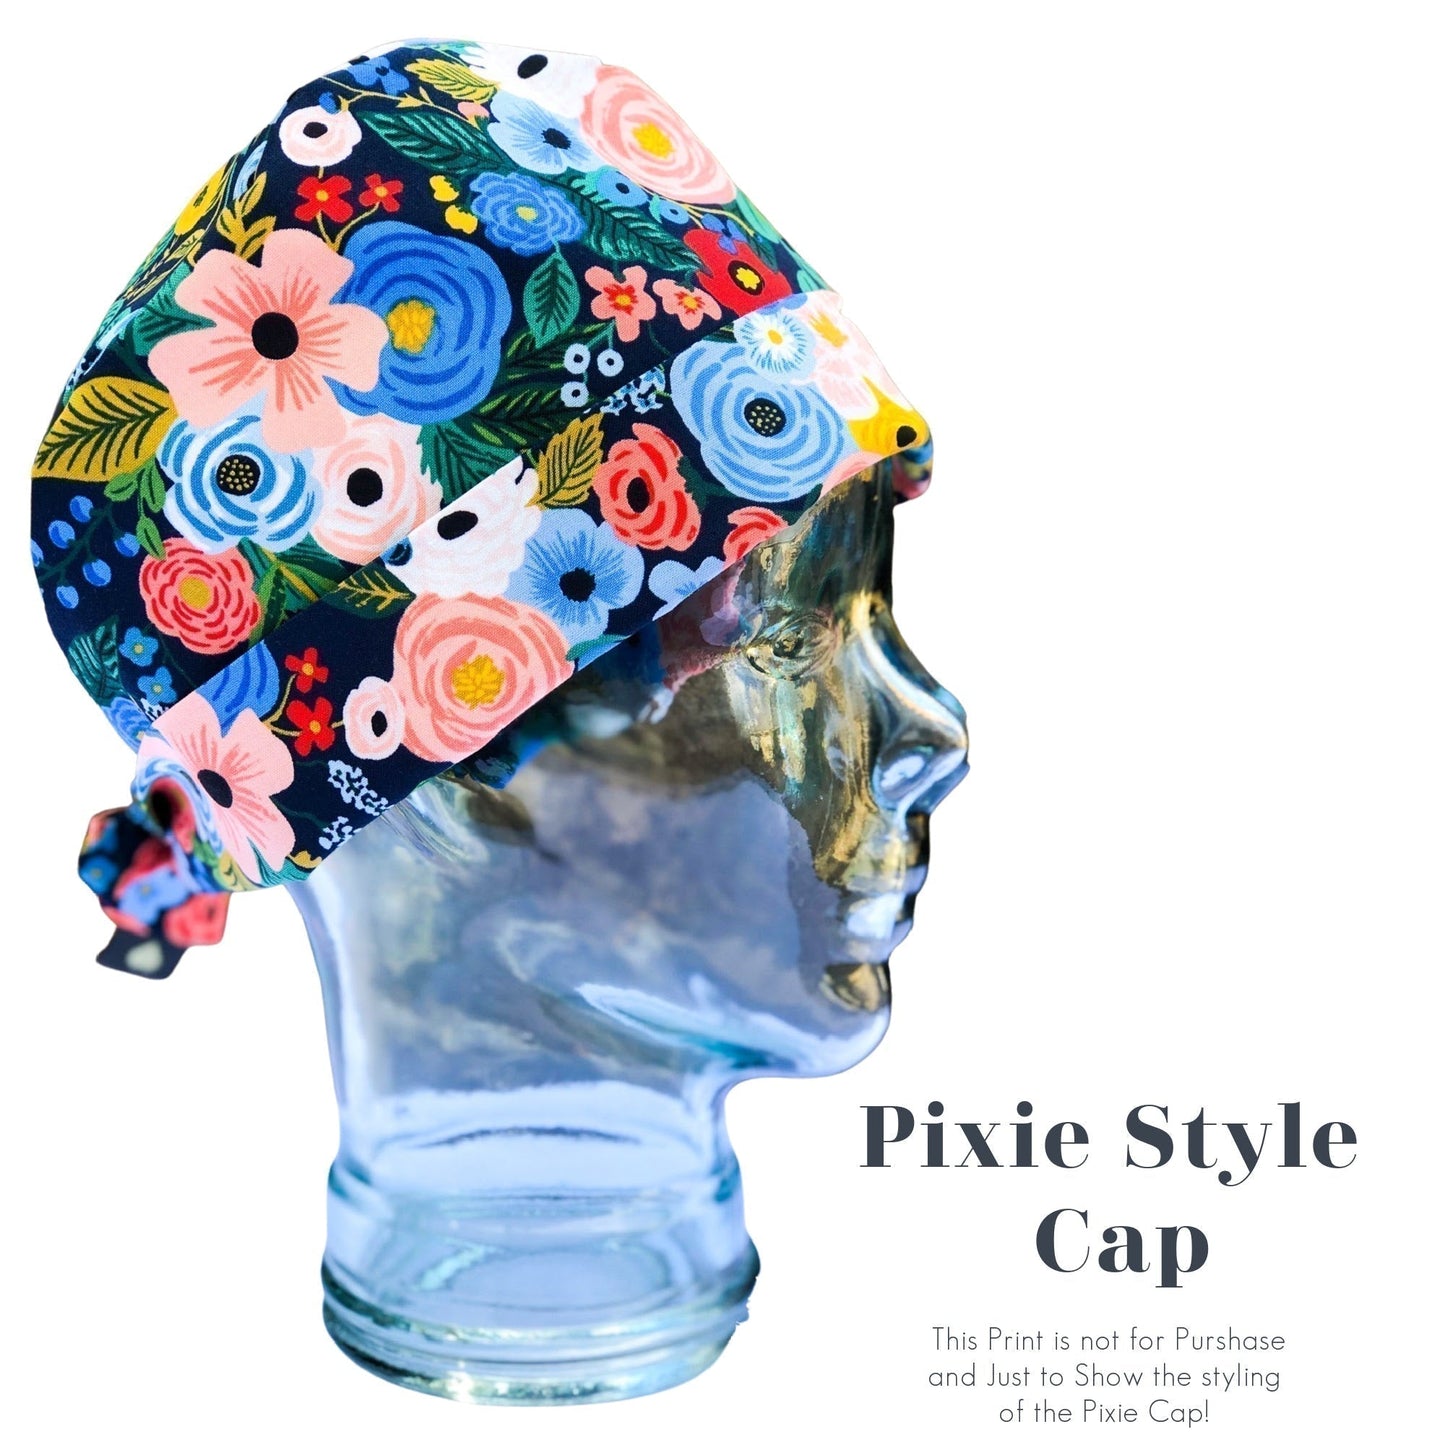 Cocktails on Periwinkle | Pixie